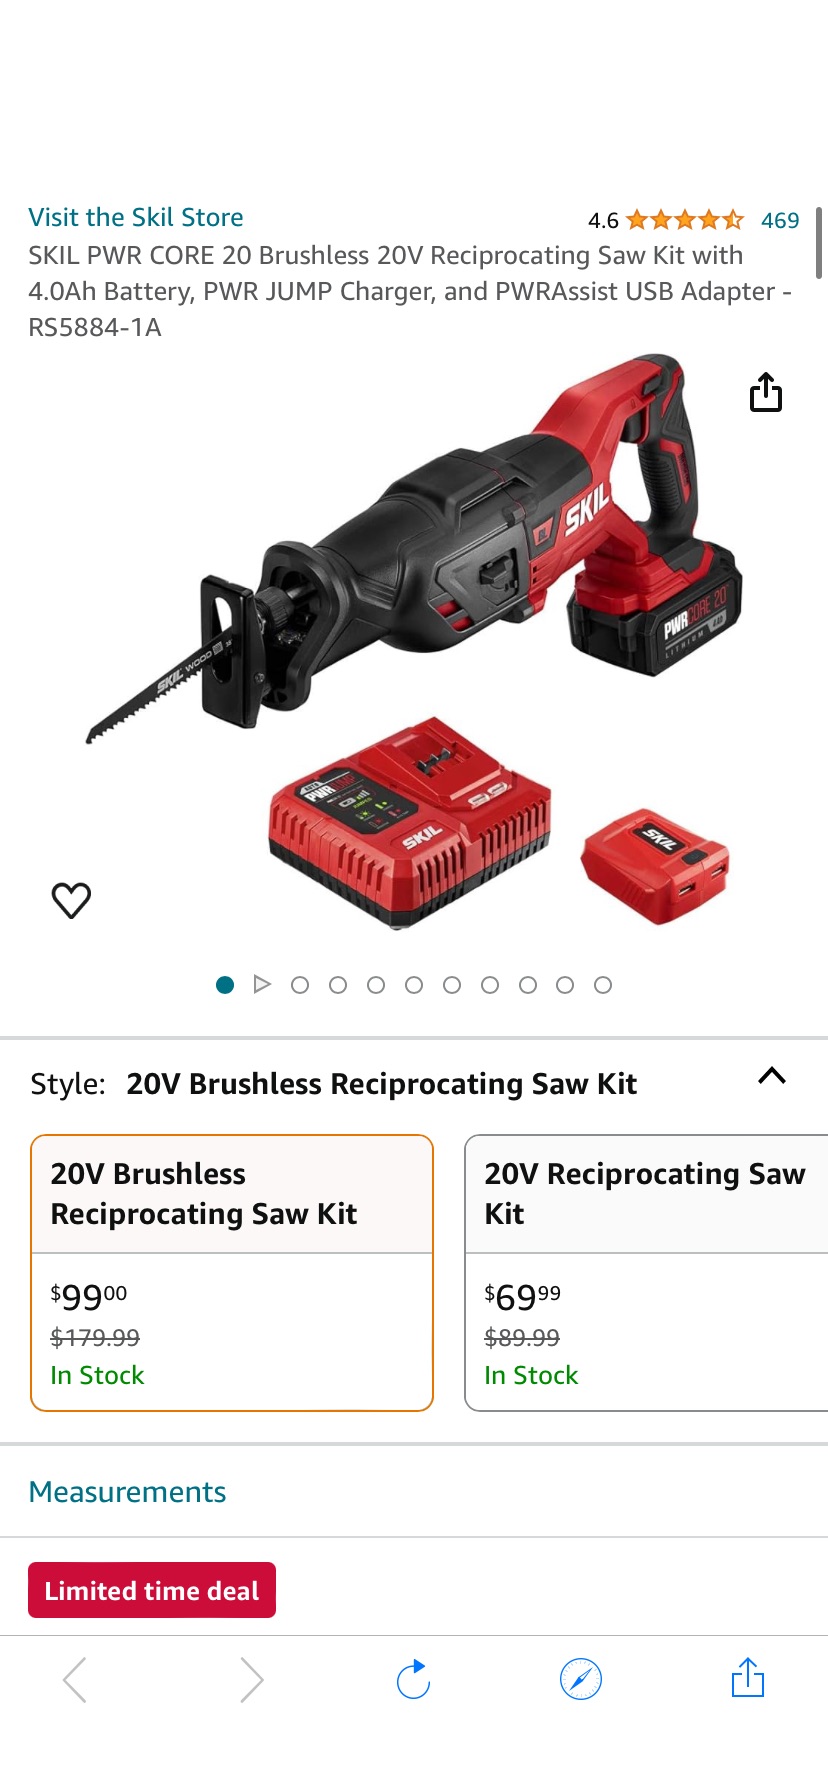 SKIL PWR CORE 20 Brushless 20V Reciprocating Saw Kit with 4.0Ah Battery, PWR JUMP Charger, and PWRAssist USB Adapter - RS5884-1A - Amazon.com